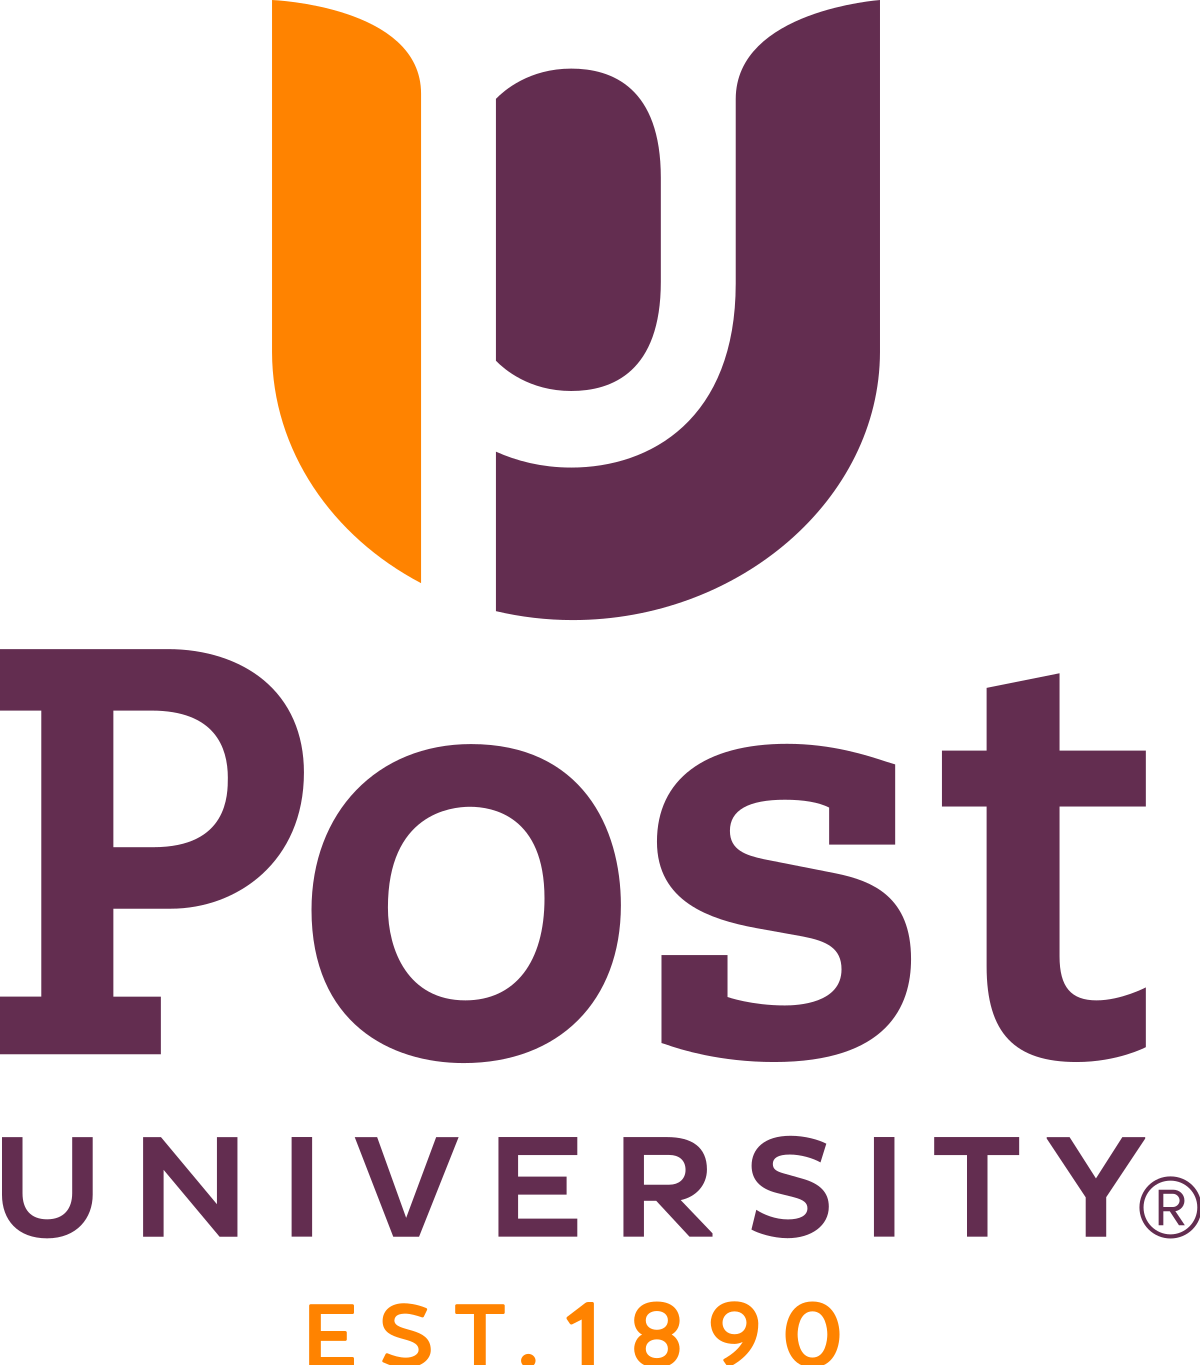 A logo of Post University for our school profile